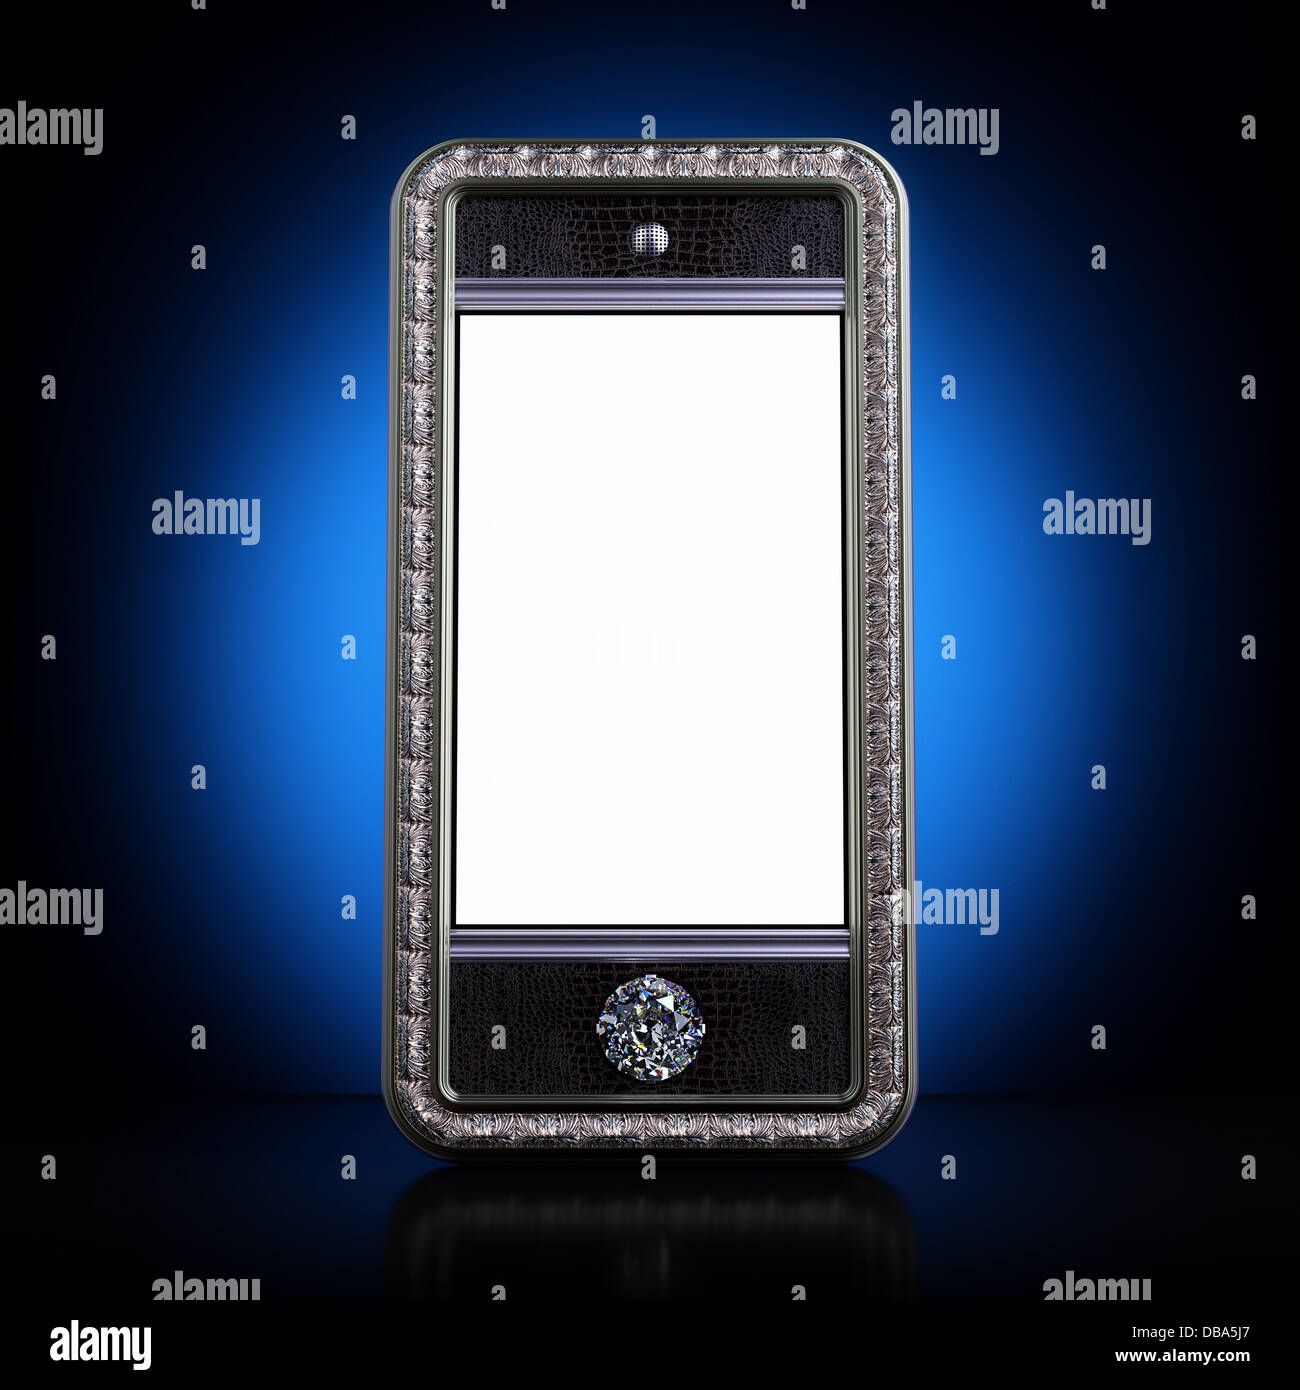 Exclusive mobile phone with blank screen. Iphone-style device Stock Photo